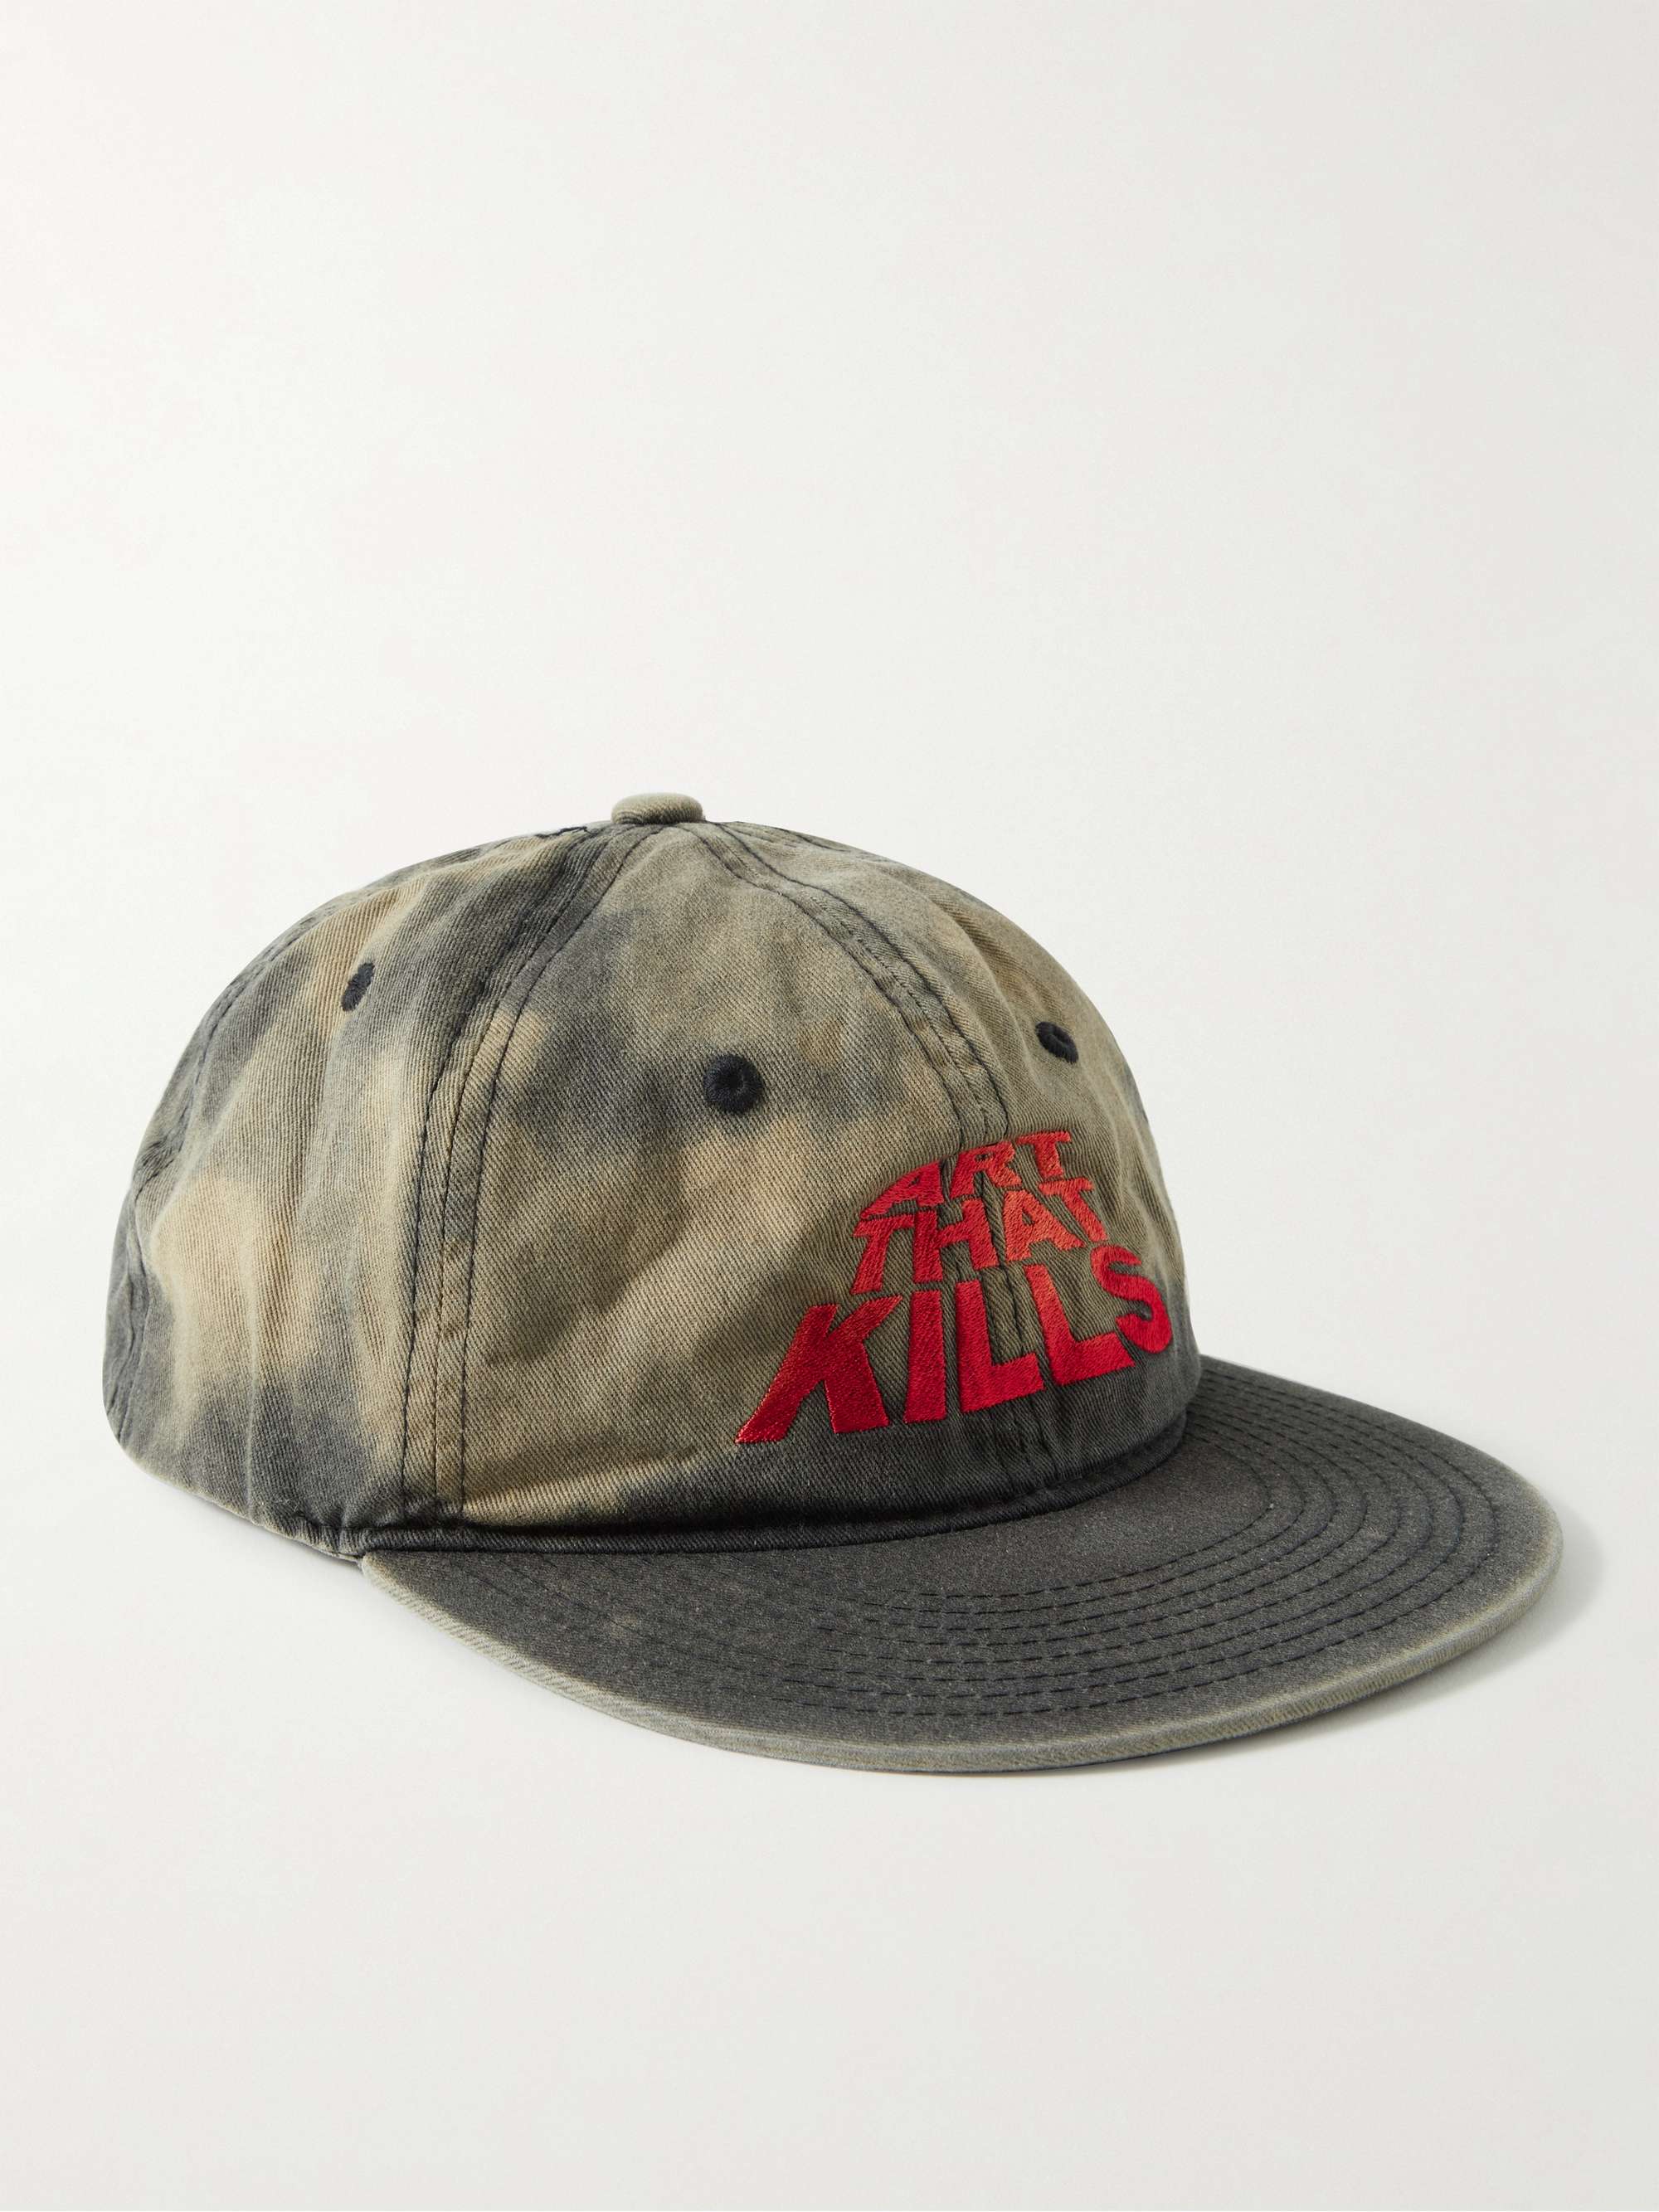 GALLERY DEPT. Distressed Embroidered Cotton-Twill Baseball Cap